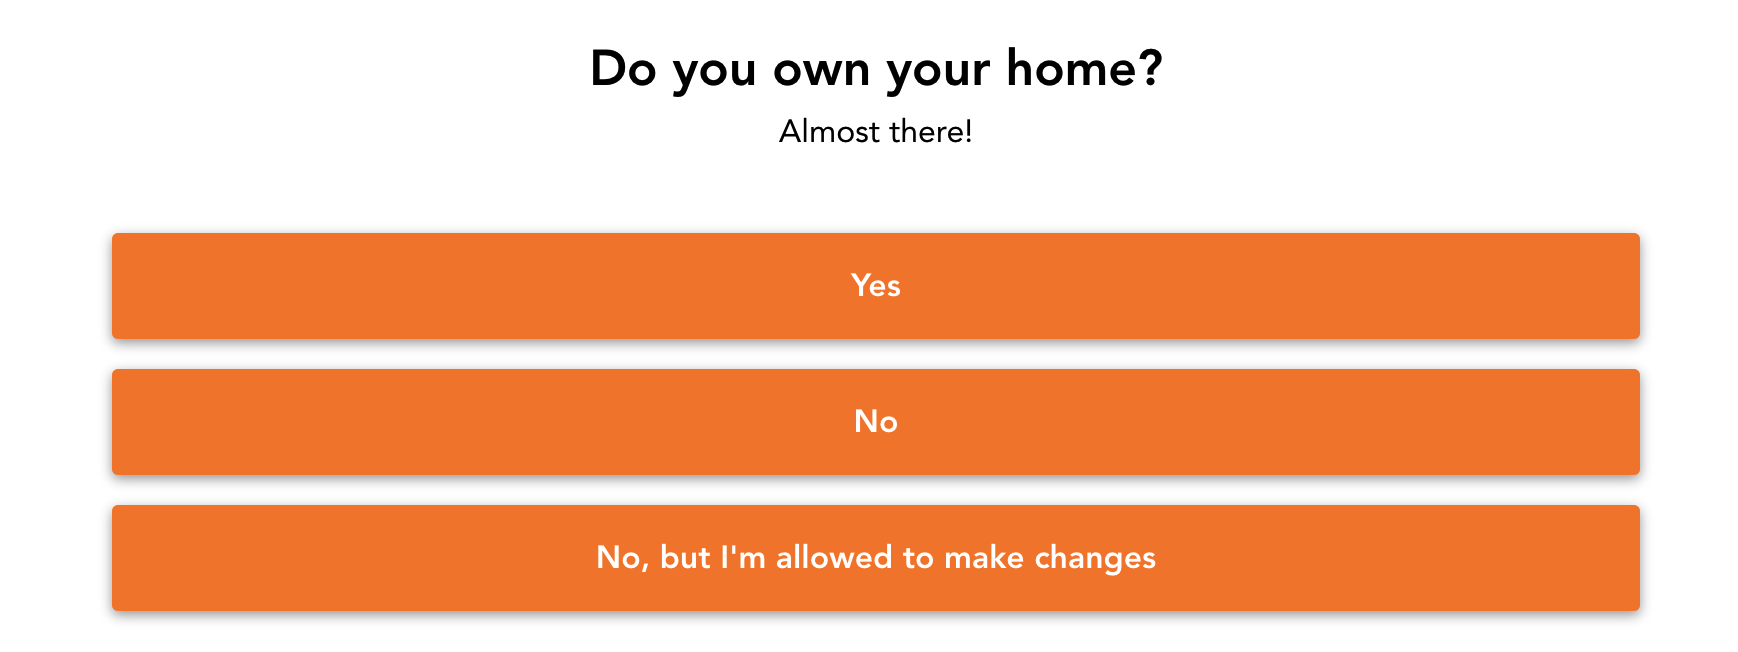 do you own your home?